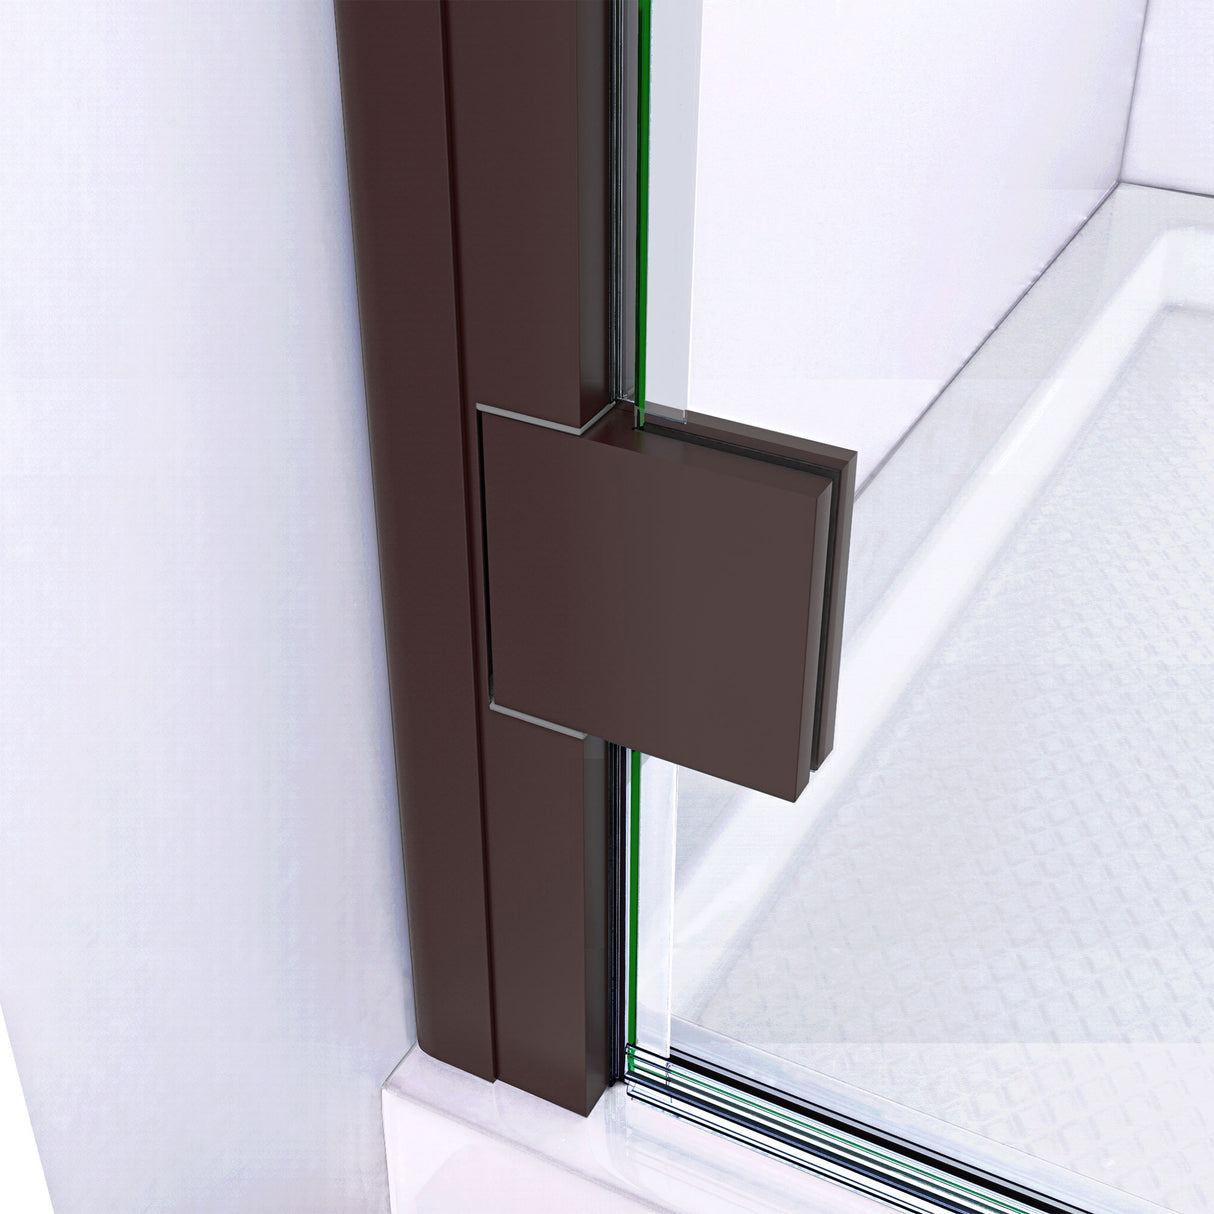 DreamLine Lumen 32 in. D x 42 in. W by 74 3/4 in. H Hinged Shower Door in Oil Rubbed Bronze with Biscuit Acrylic Base Kit